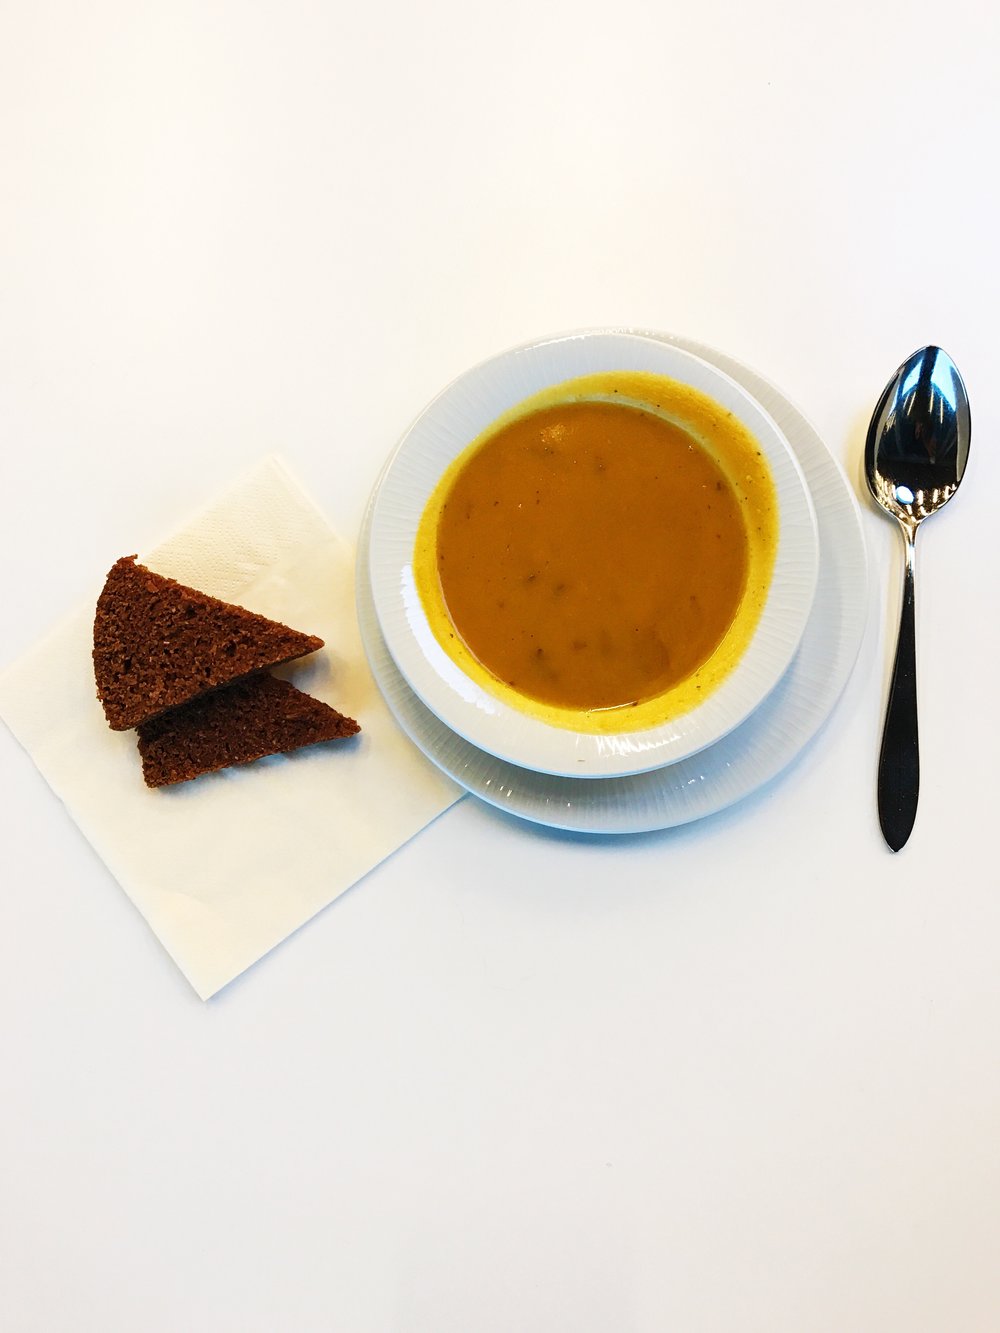 Coconut, carrot and ginger soup with a side of rye bread.